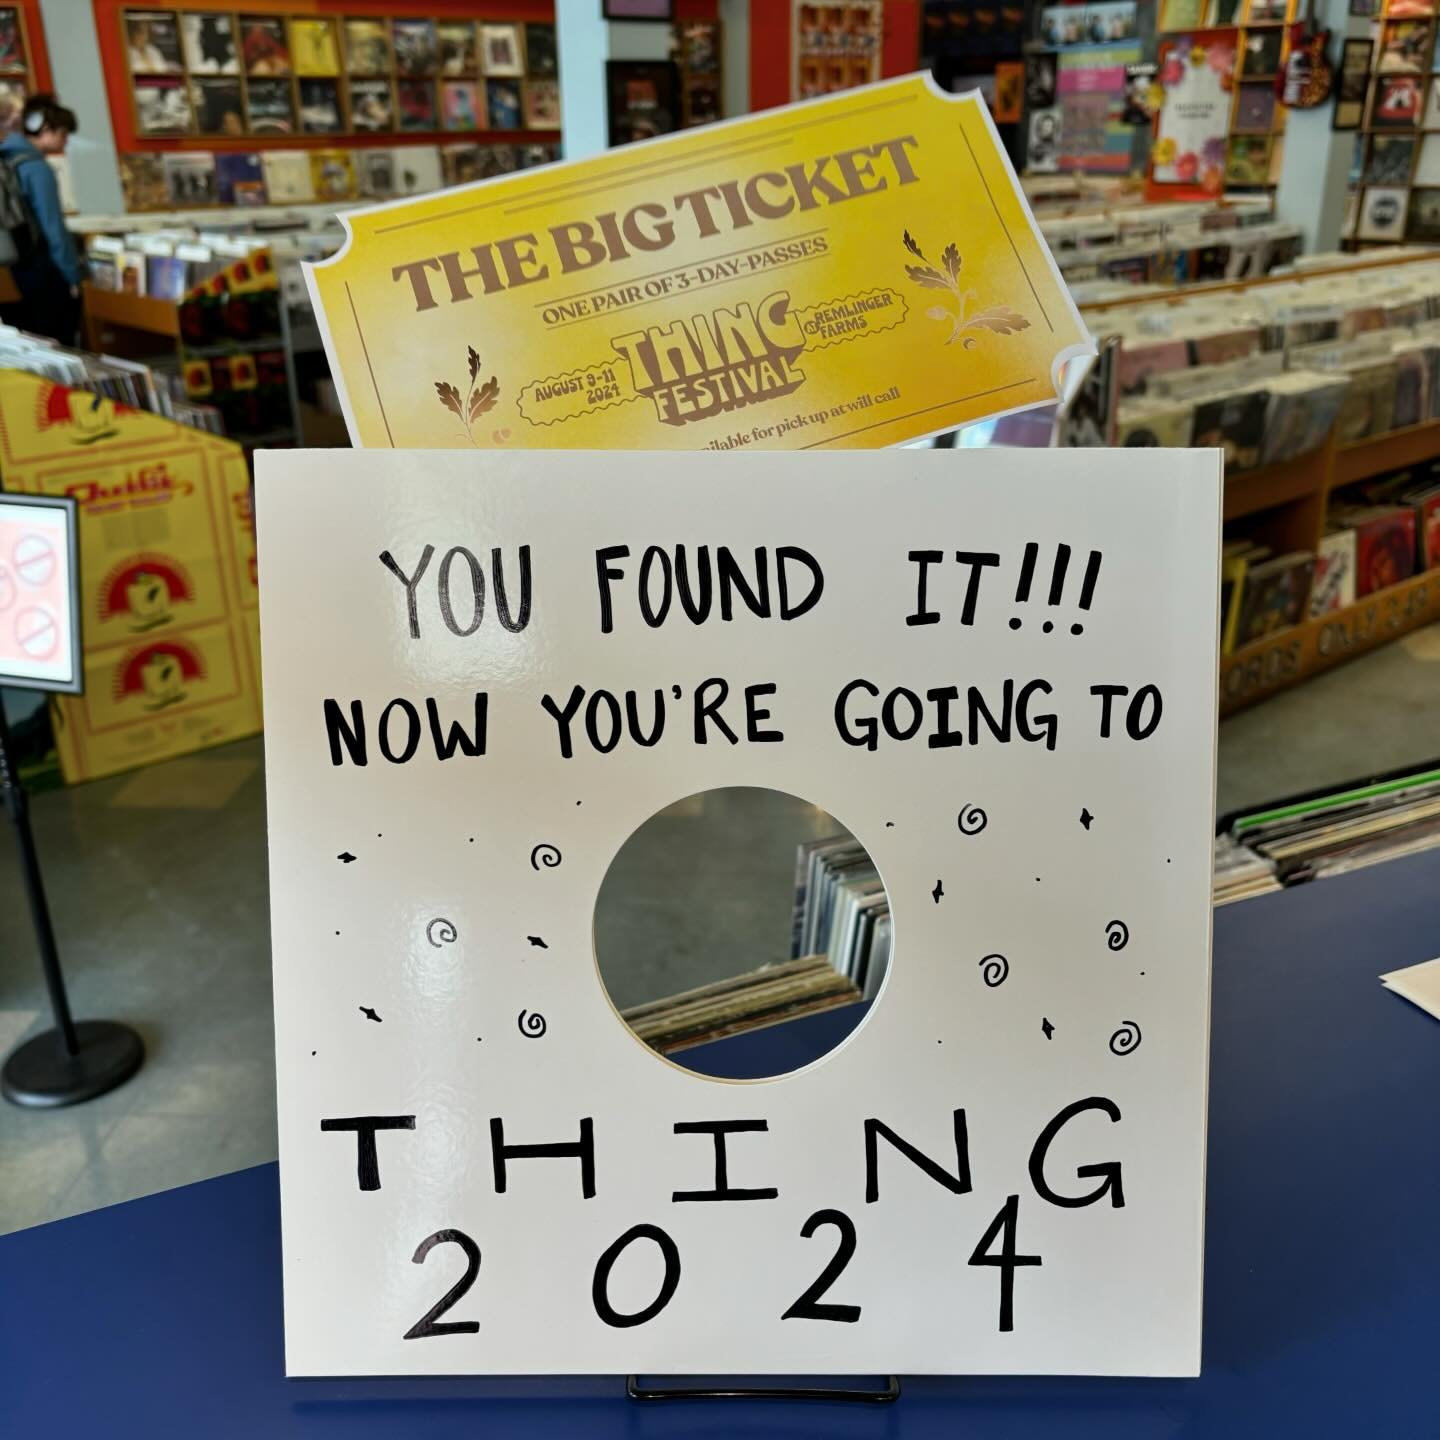 Take note! On Record Store Day Saturday, the great hunt for the THING 2024 Golden Ticket begins! Somewhere hidden in the store will be a golden ticket that grants you a pair of 3 day passes to THING 2024 at Remlinger Farms this August! 🎟🎟
Your one 